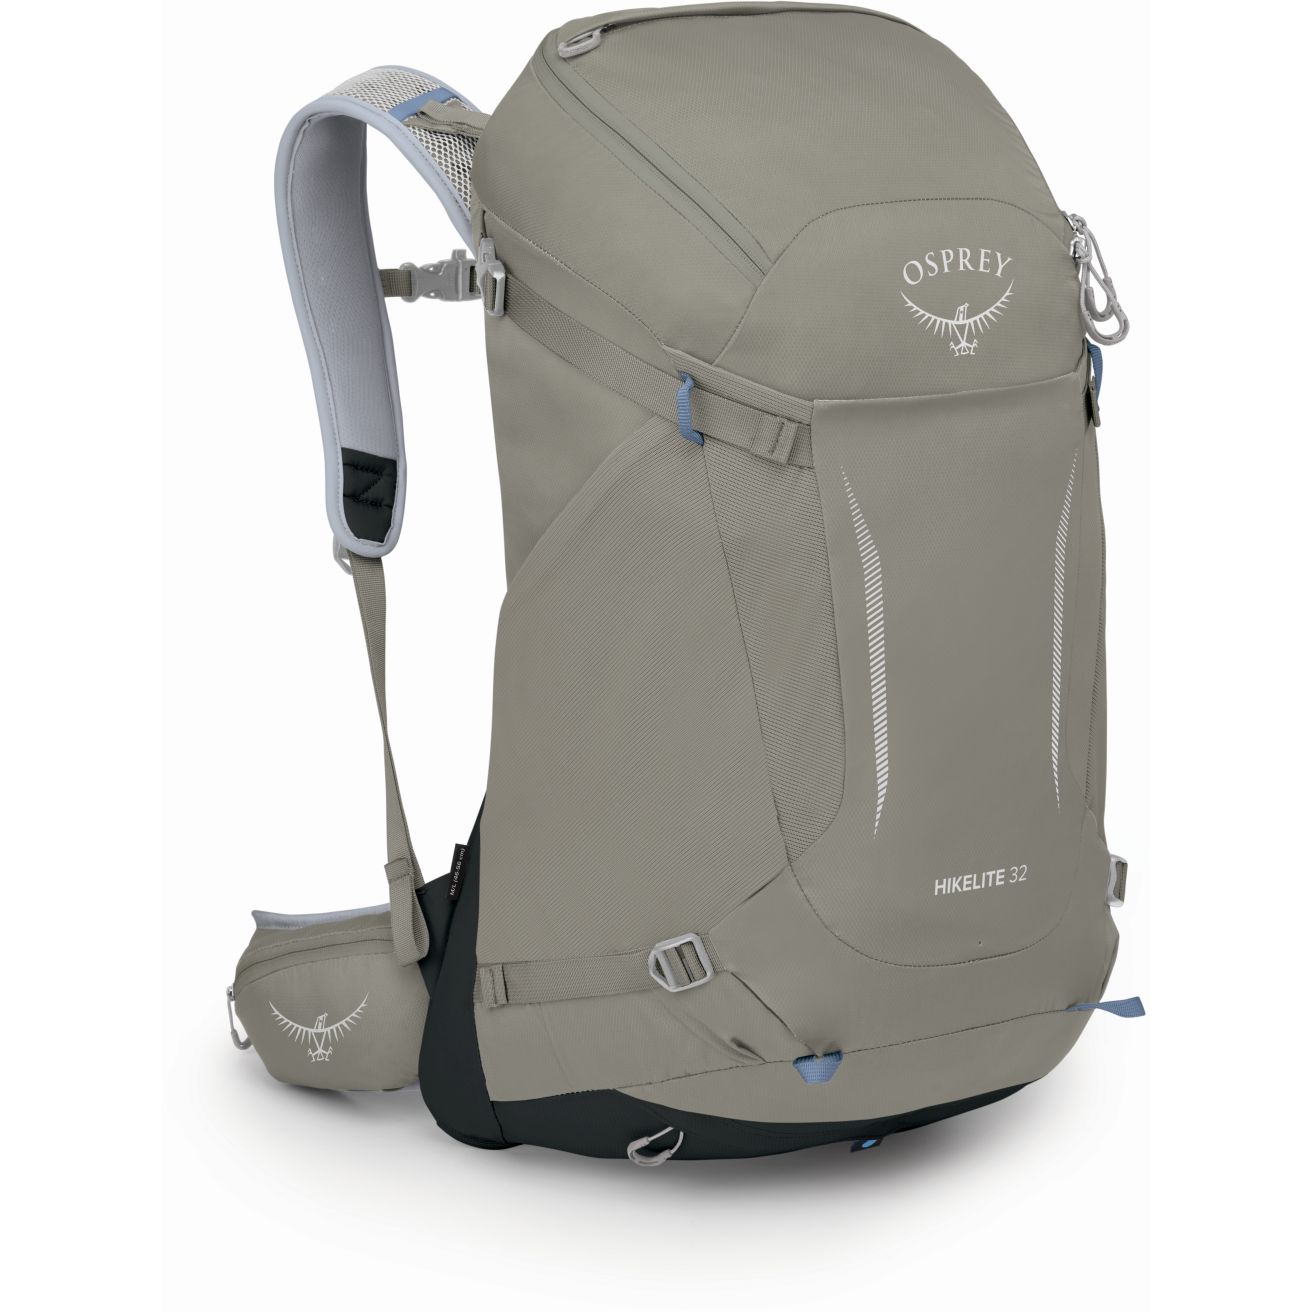 Picture of Osprey Hikelite 32 Backpack - Tan Concrete - M/L